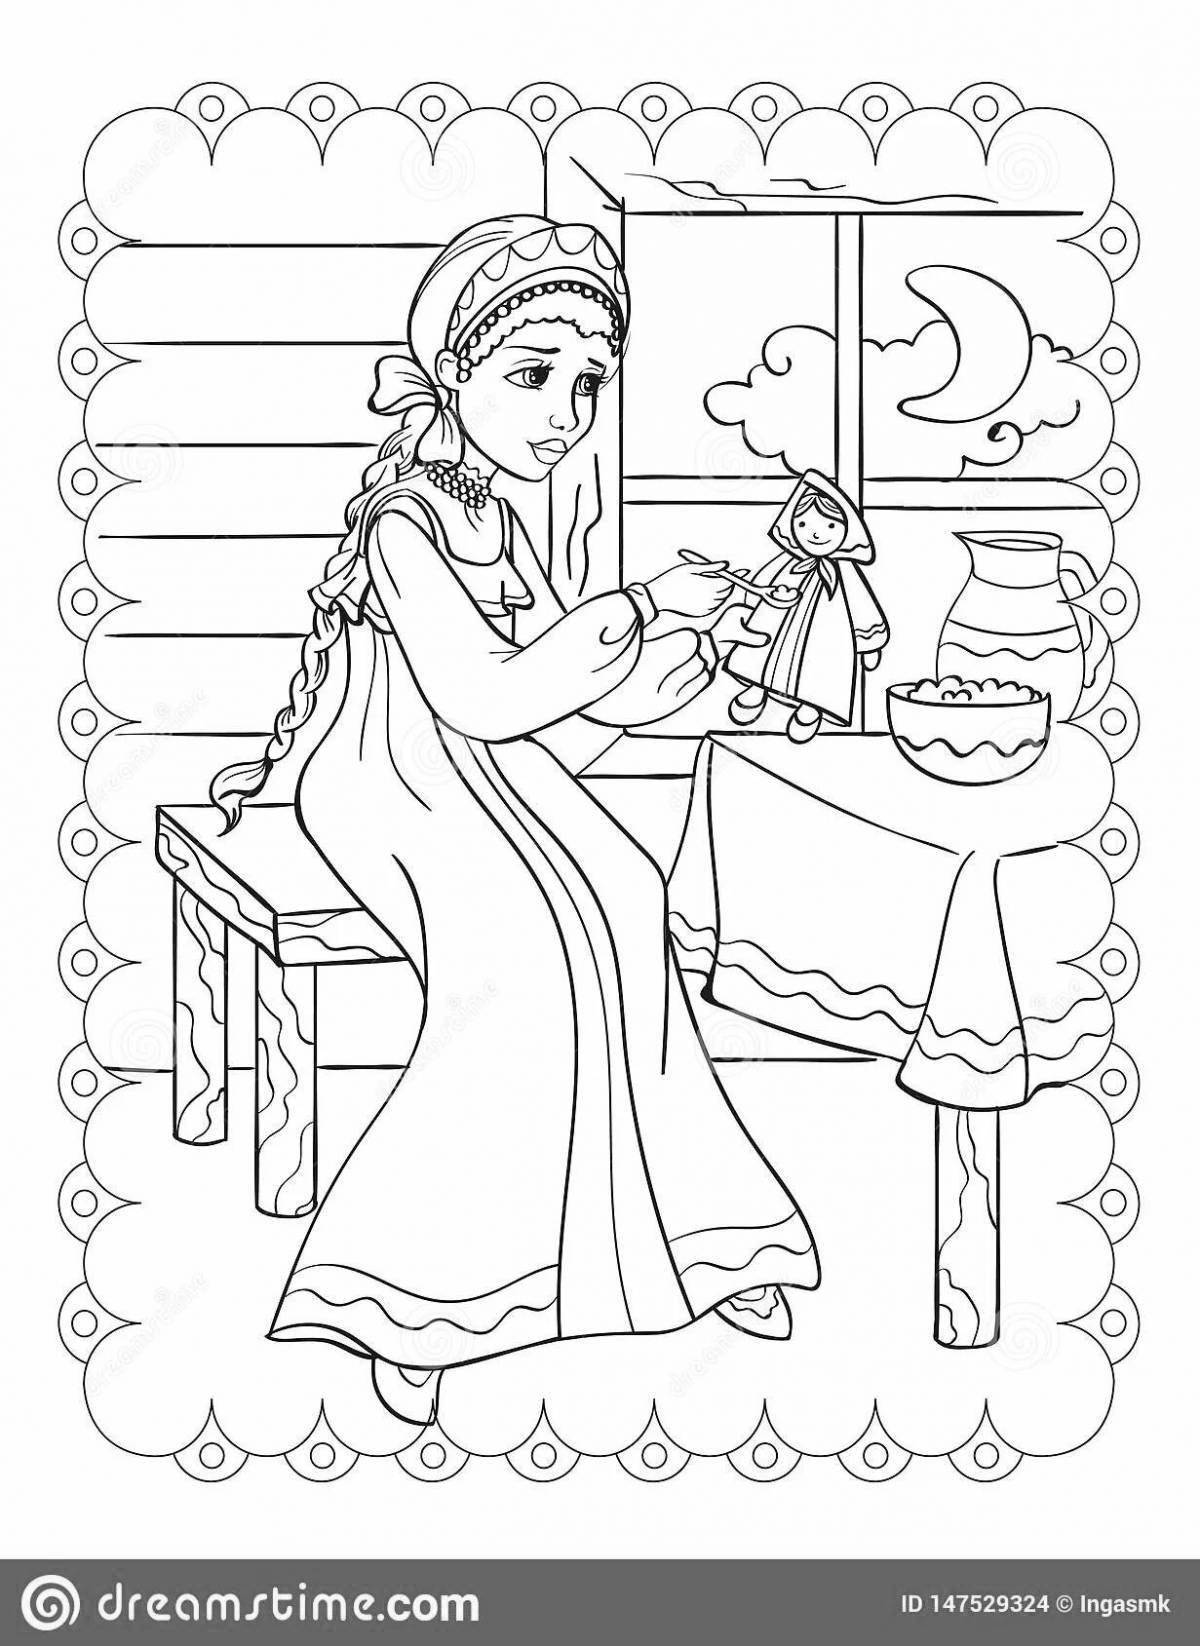 Exalted coloring vasilisa the wise